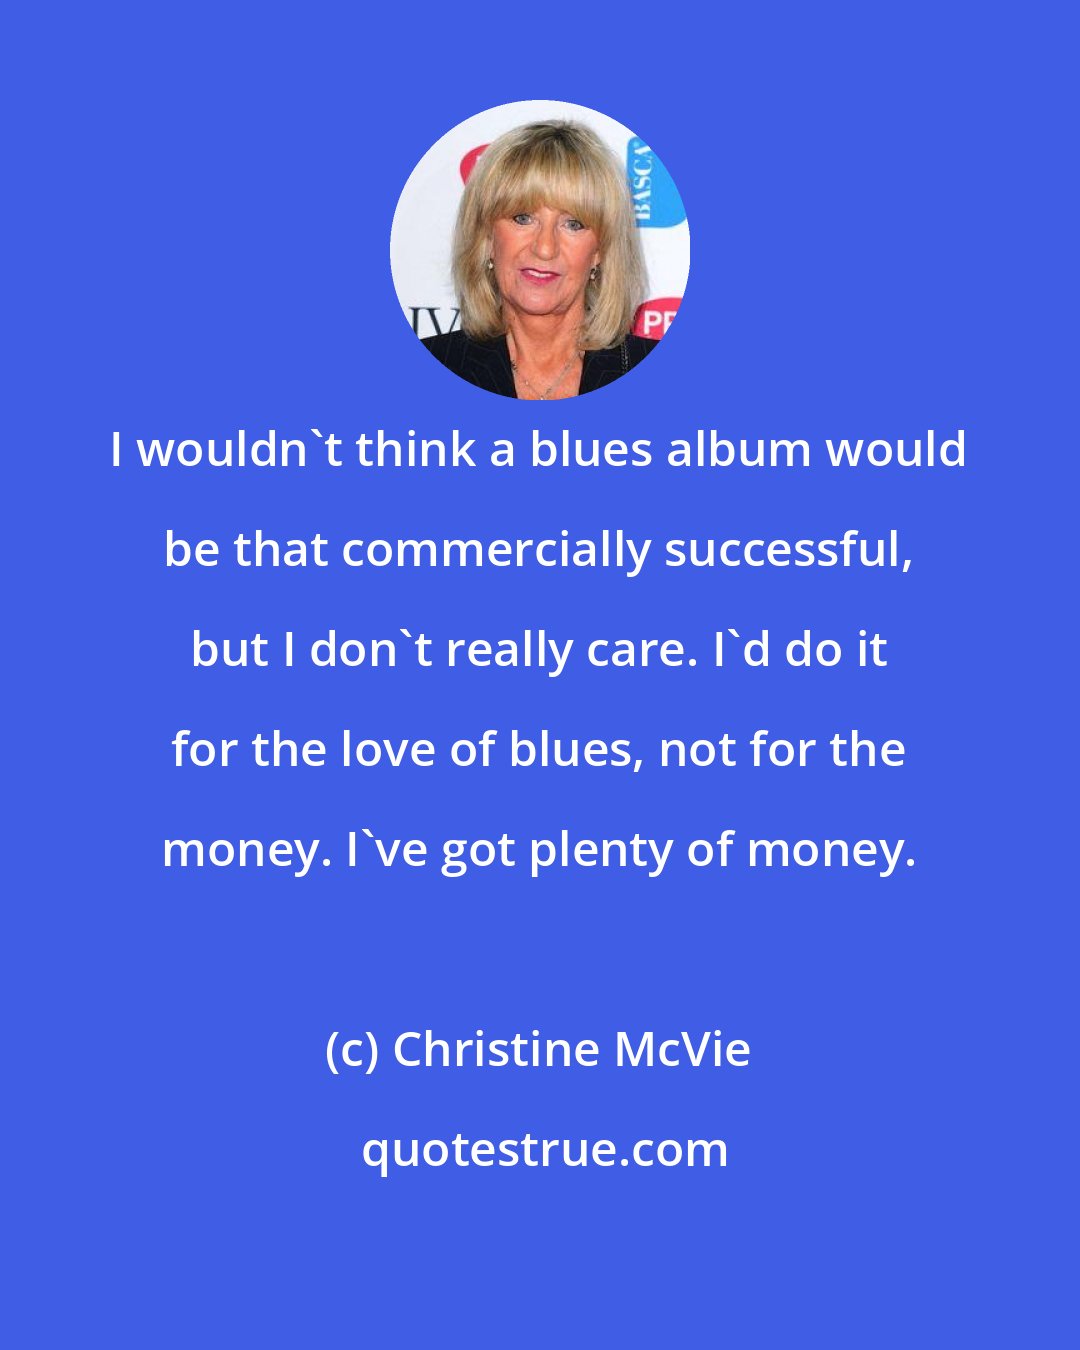 Christine McVie: I wouldn't think a blues album would be that commercially successful, but I don't really care. I'd do it for the love of blues, not for the money. I've got plenty of money.